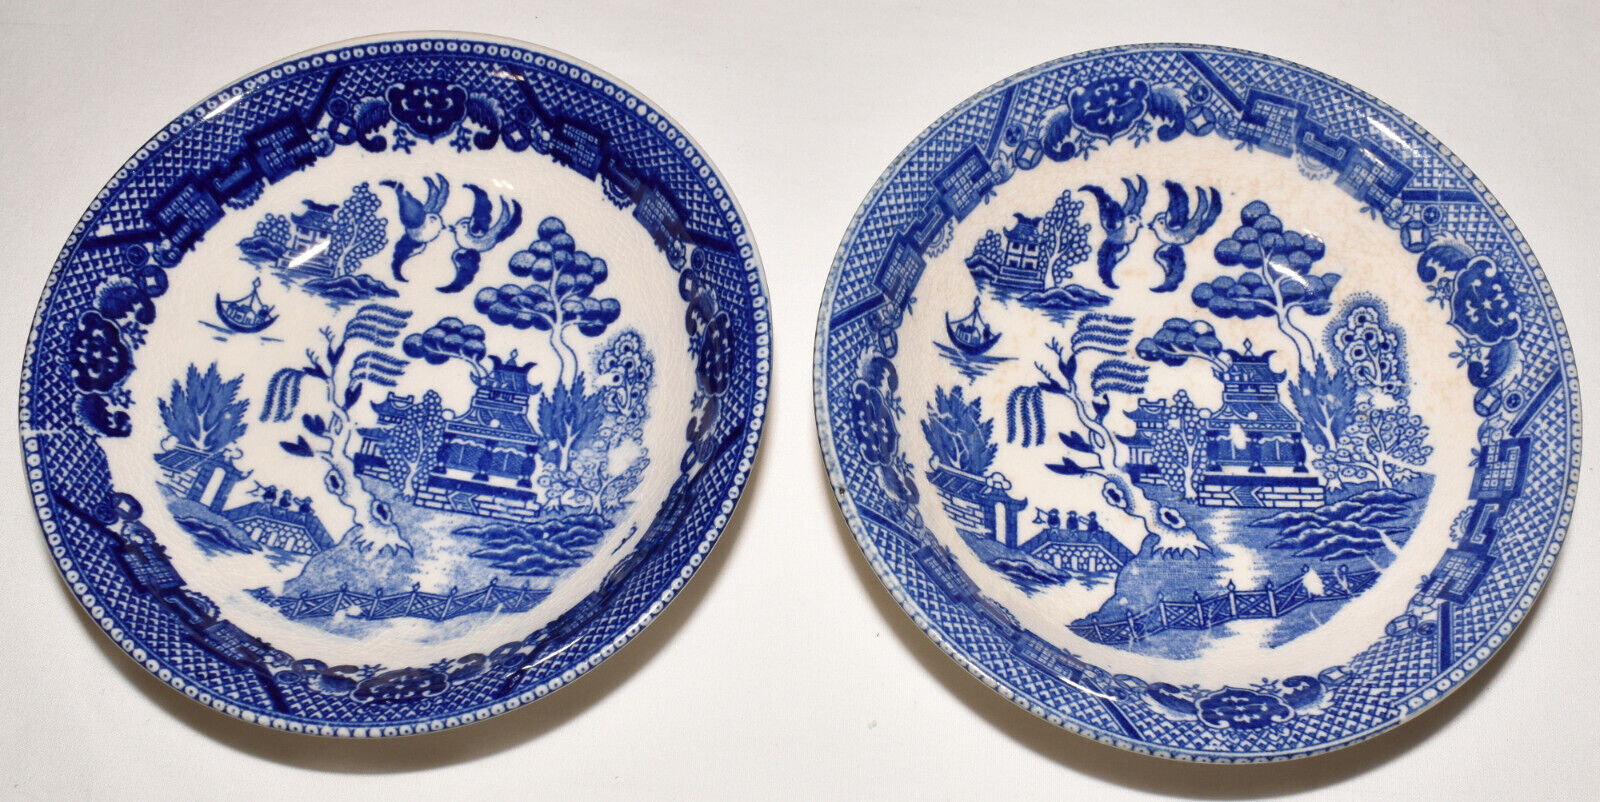 Primary image for Vintage Japan Blue Willow Berry/Ice Cream Bowls Set of 2 Blue Transferware Bowls